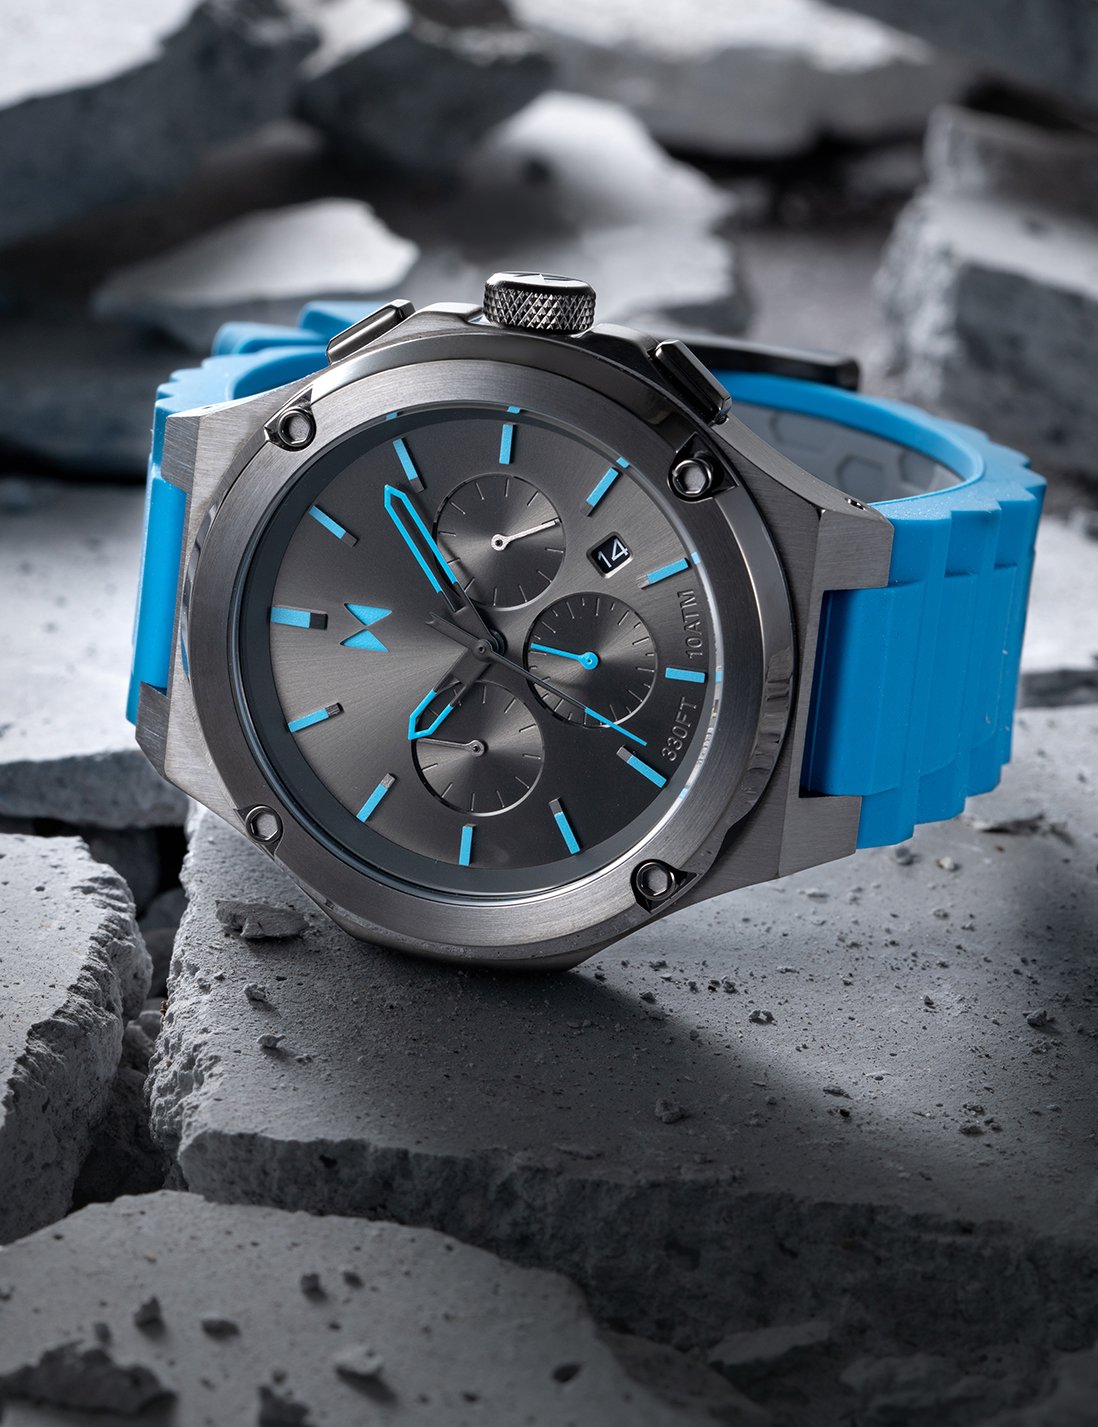 MVMT watch with blue strap and black face lying on cracked concrete